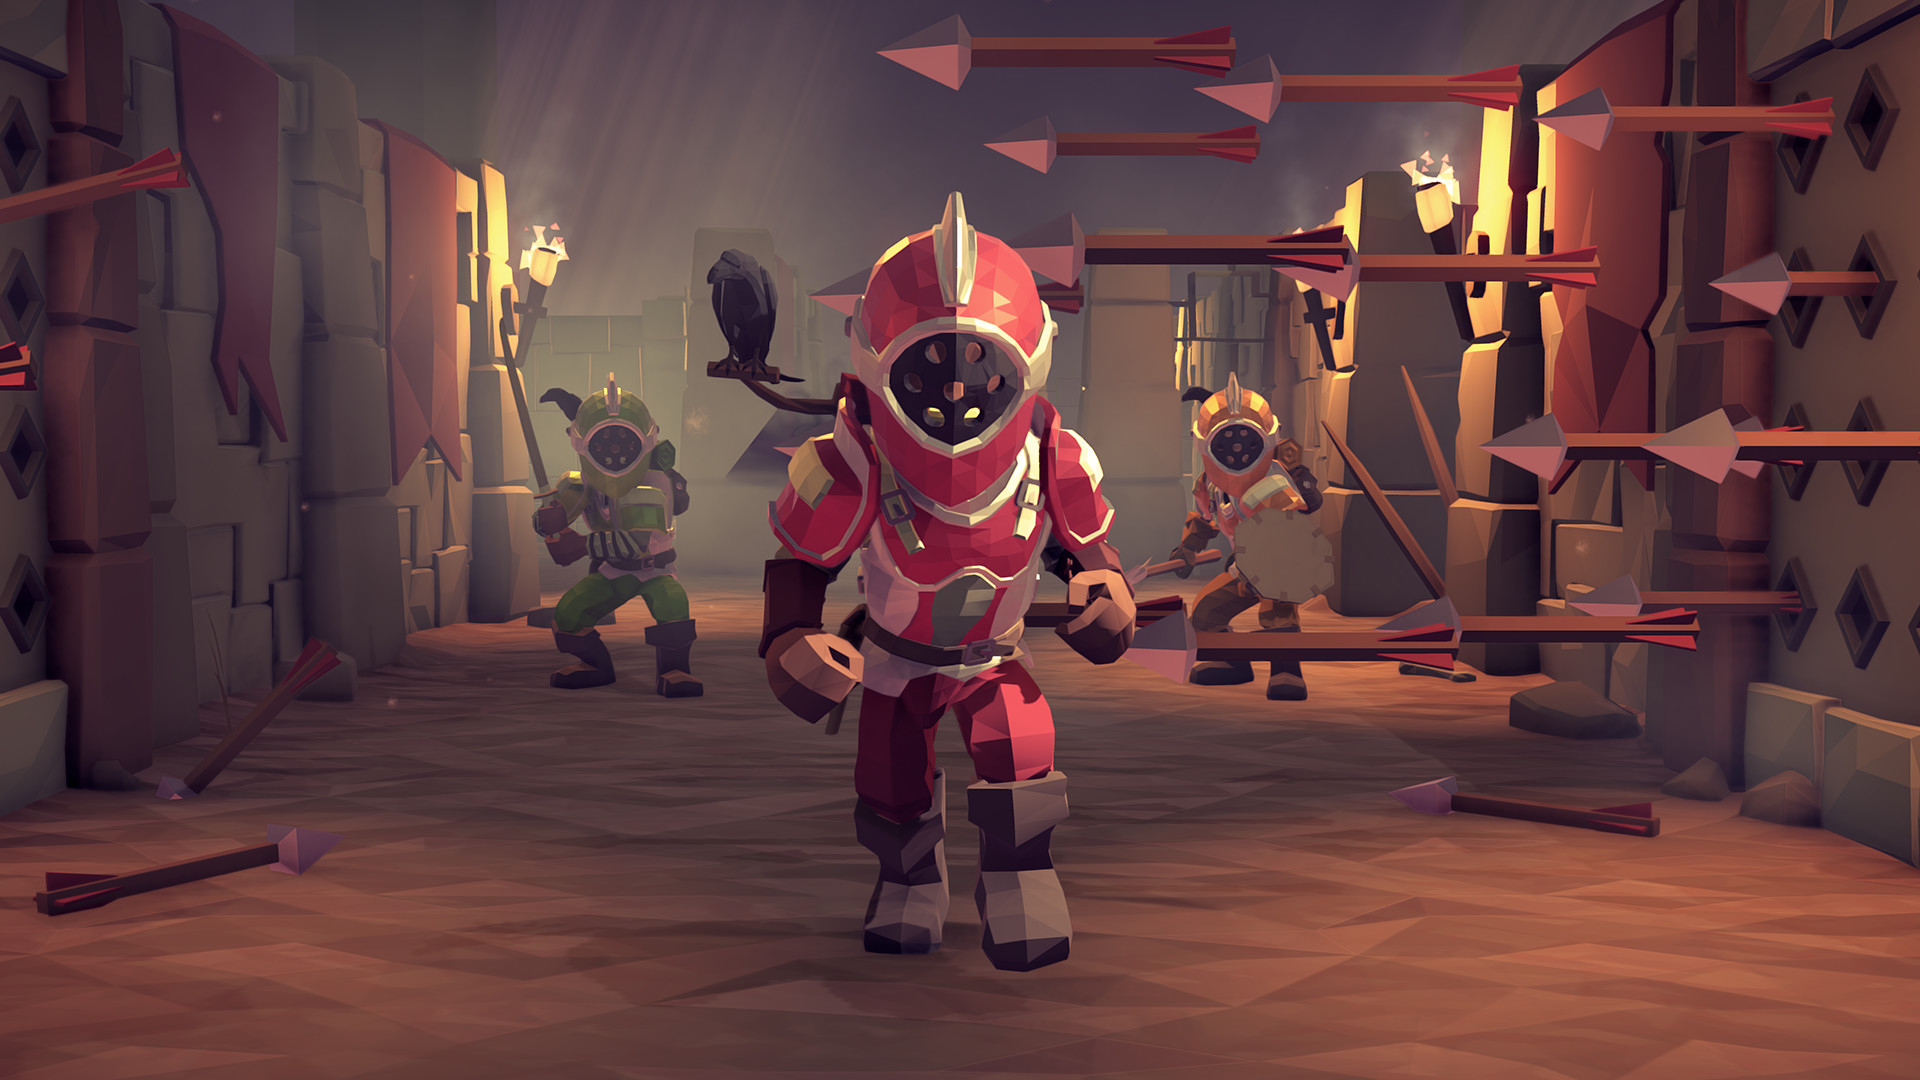 For The King: Cyclops Armor on Steam